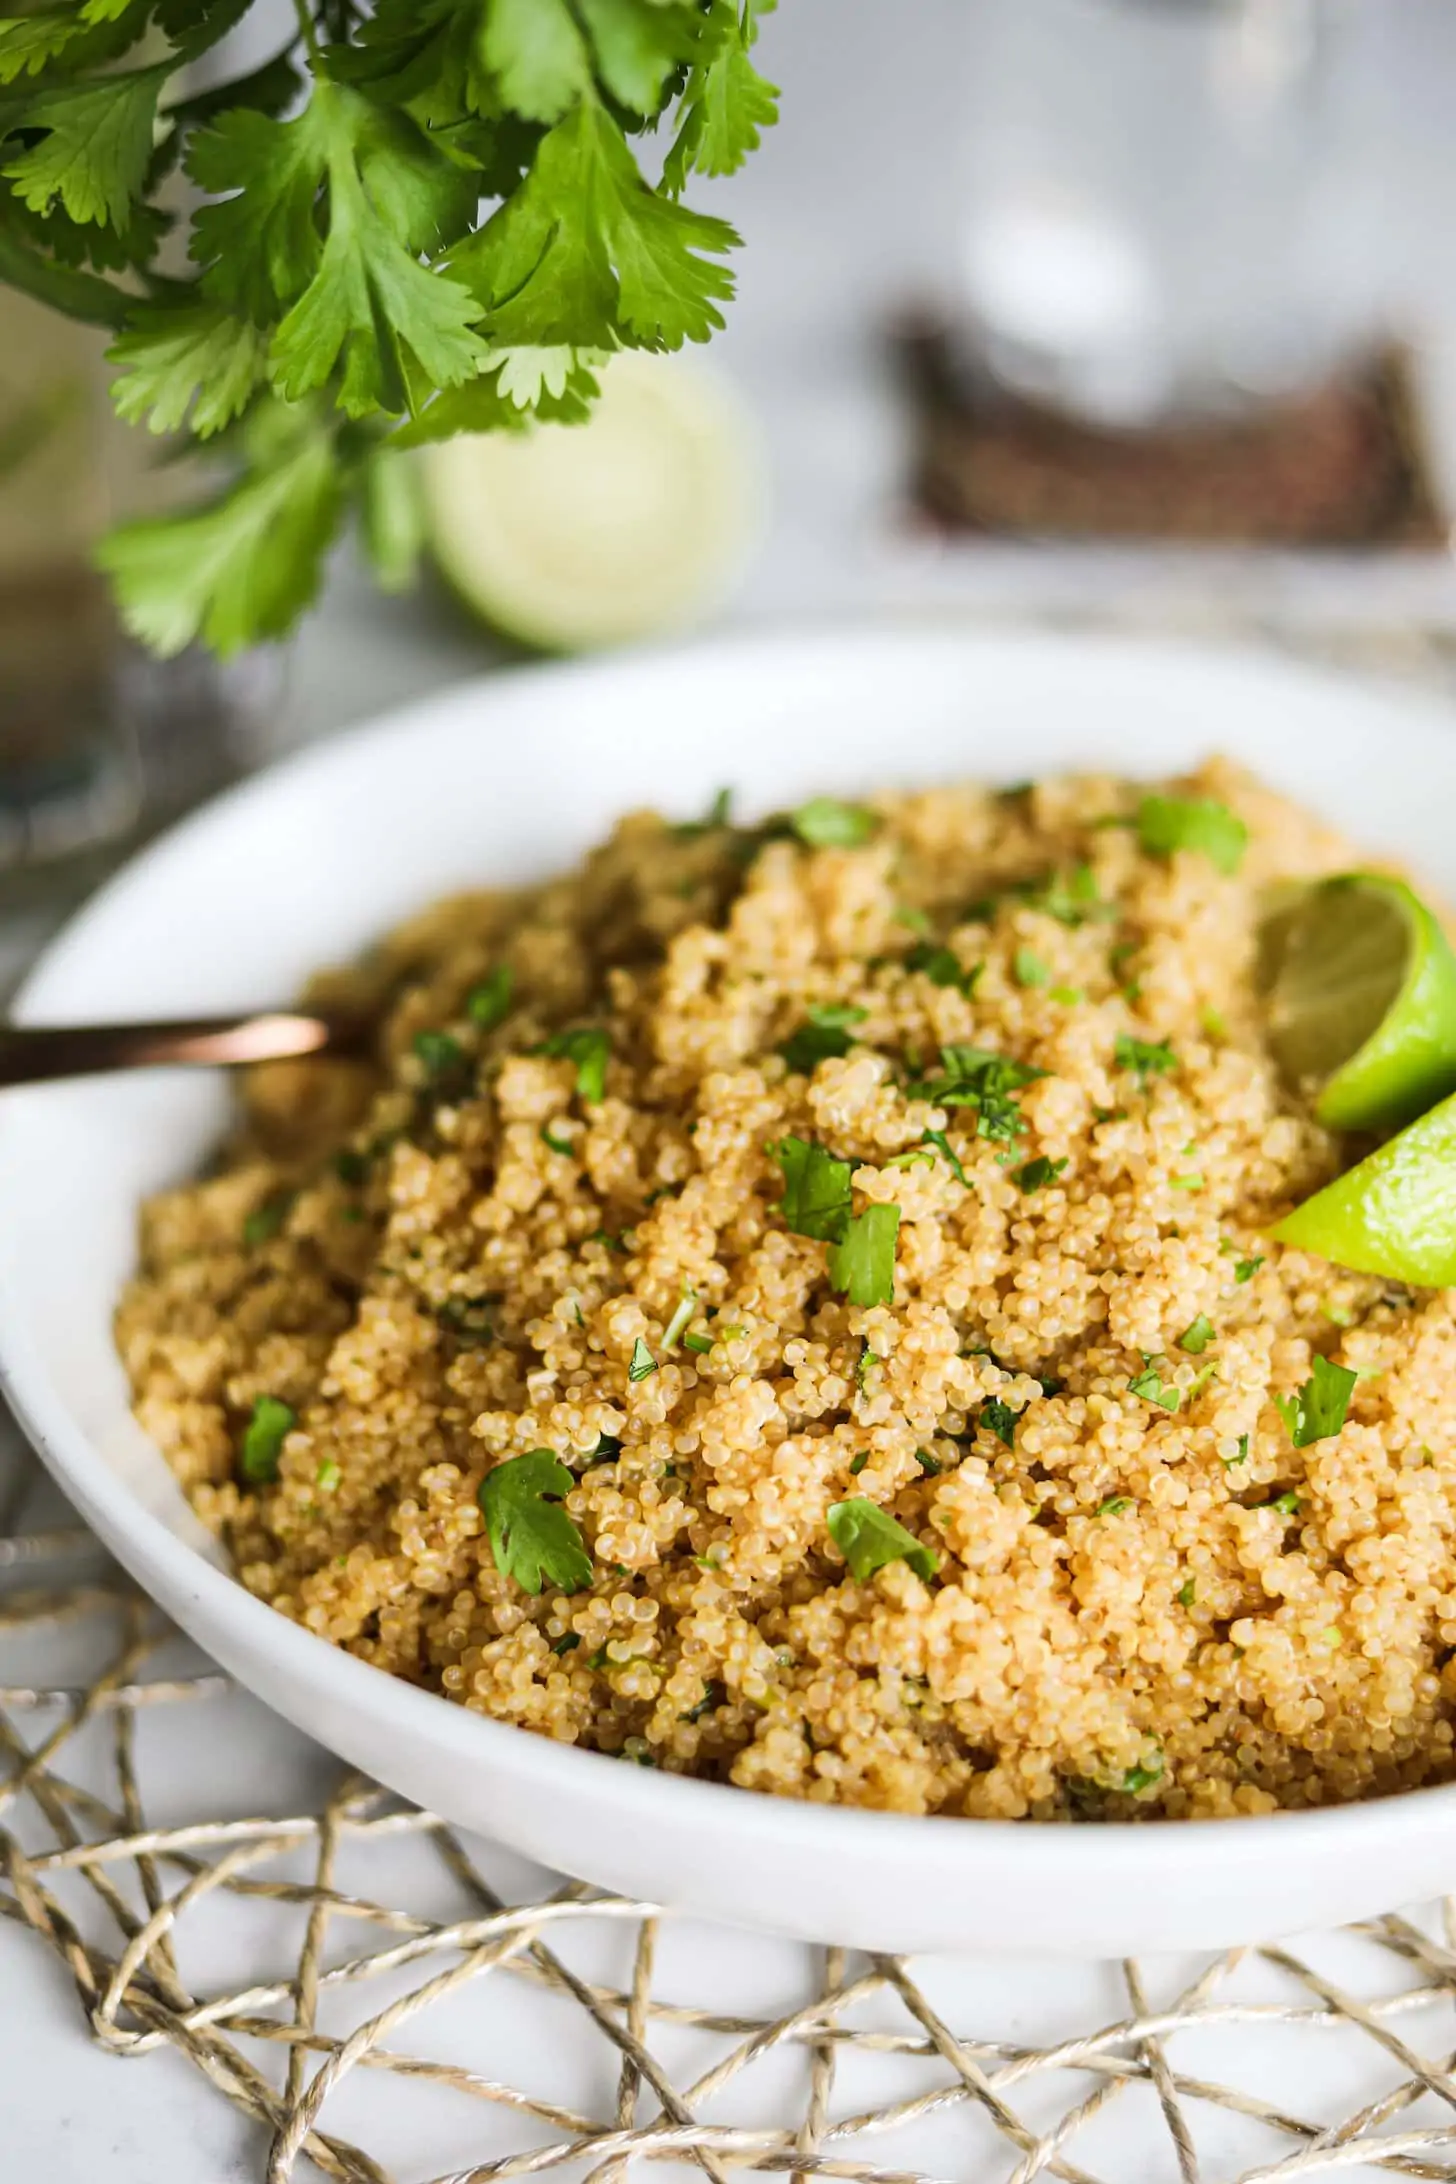 perspective shot of a bowl of cooked quinoa topped with lime wedges with some herbs hanging over the top.